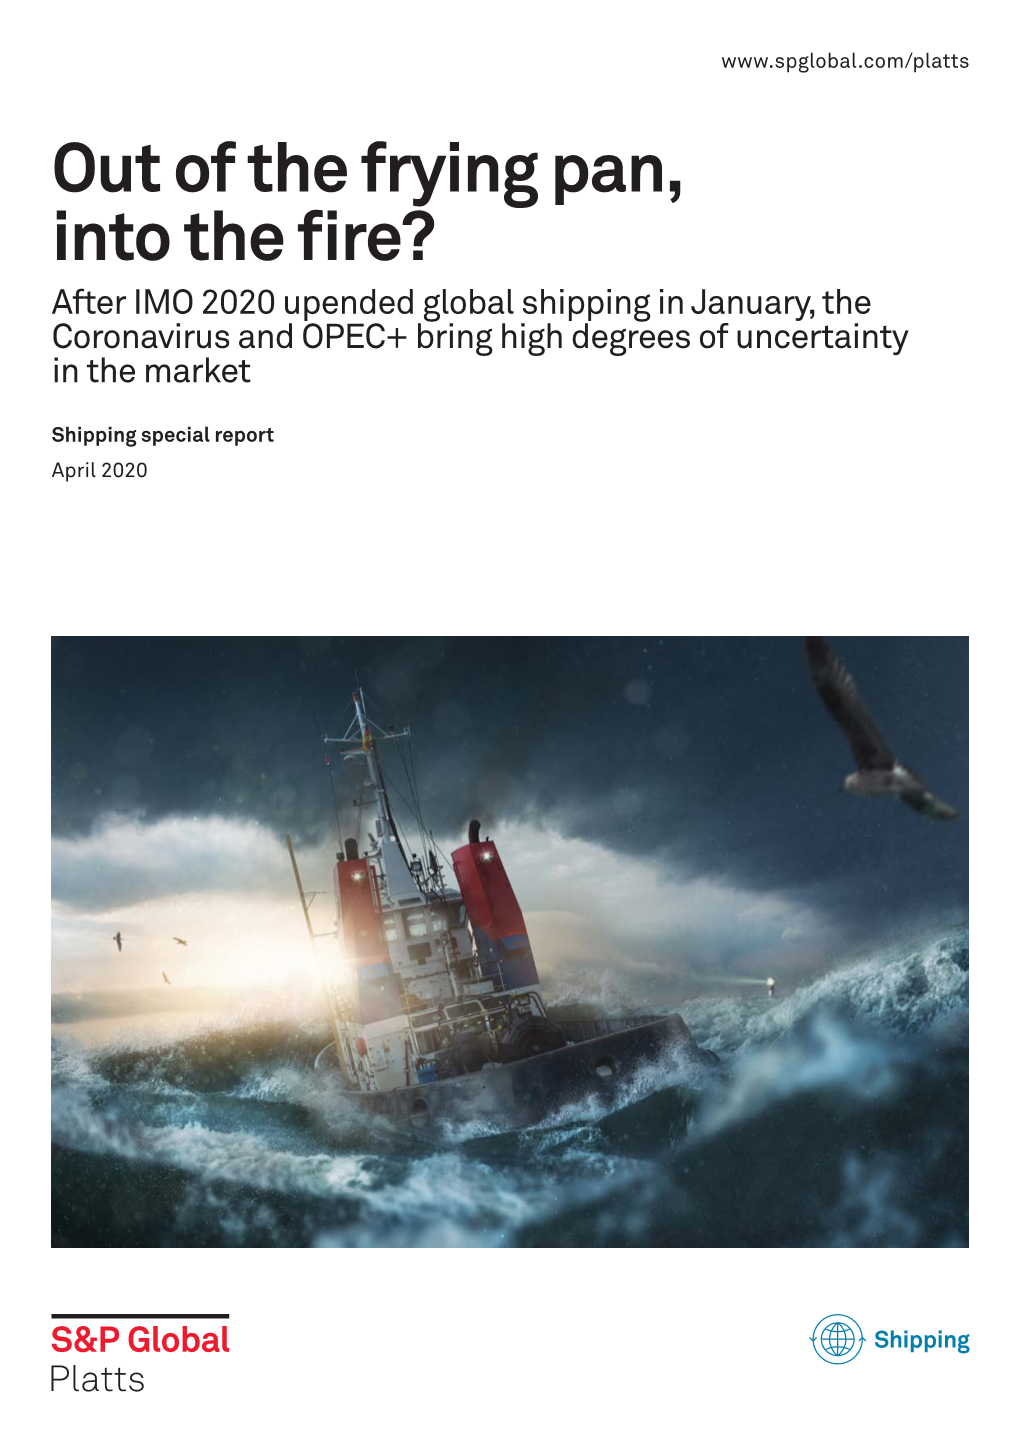 Out of the Frying Pan, Into the Fire? After IMO 2020 Upended Global Shipping in January, the Coronavirus and OPEC+ Bring High Degrees of Uncertainty in the Market